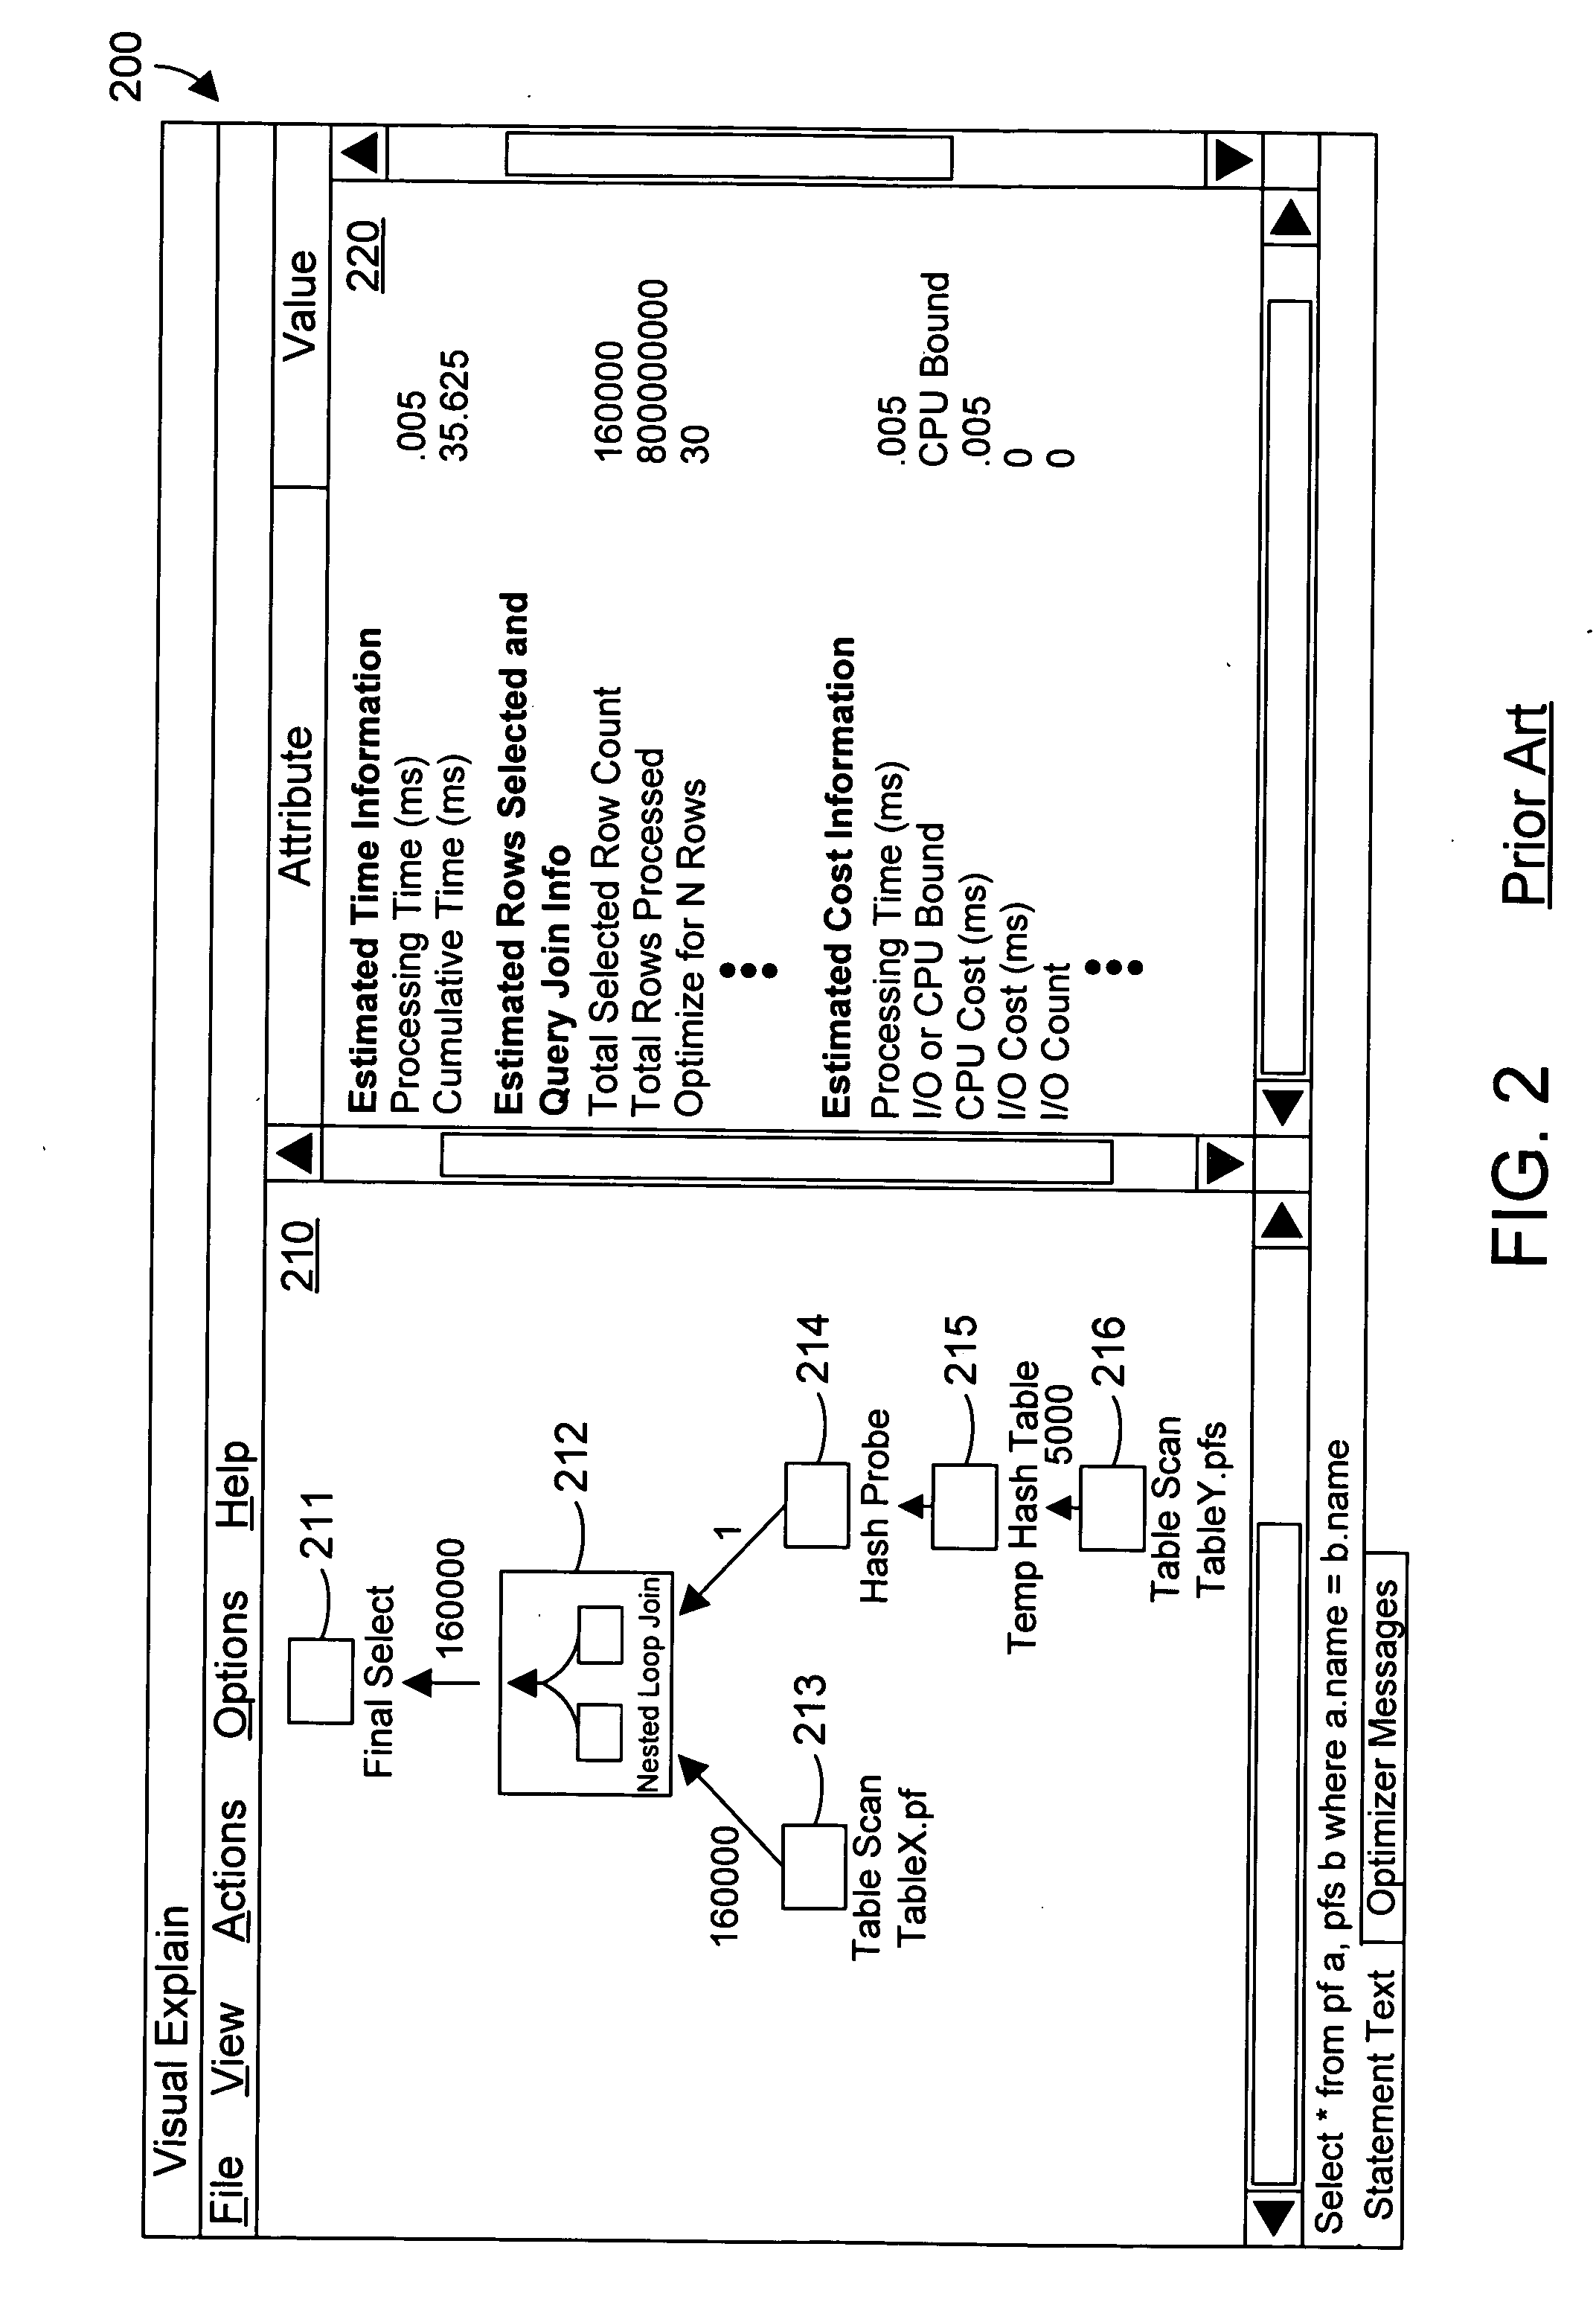 Apparatus and method for highlighting discrepancies between query performance estimates and actual query performance